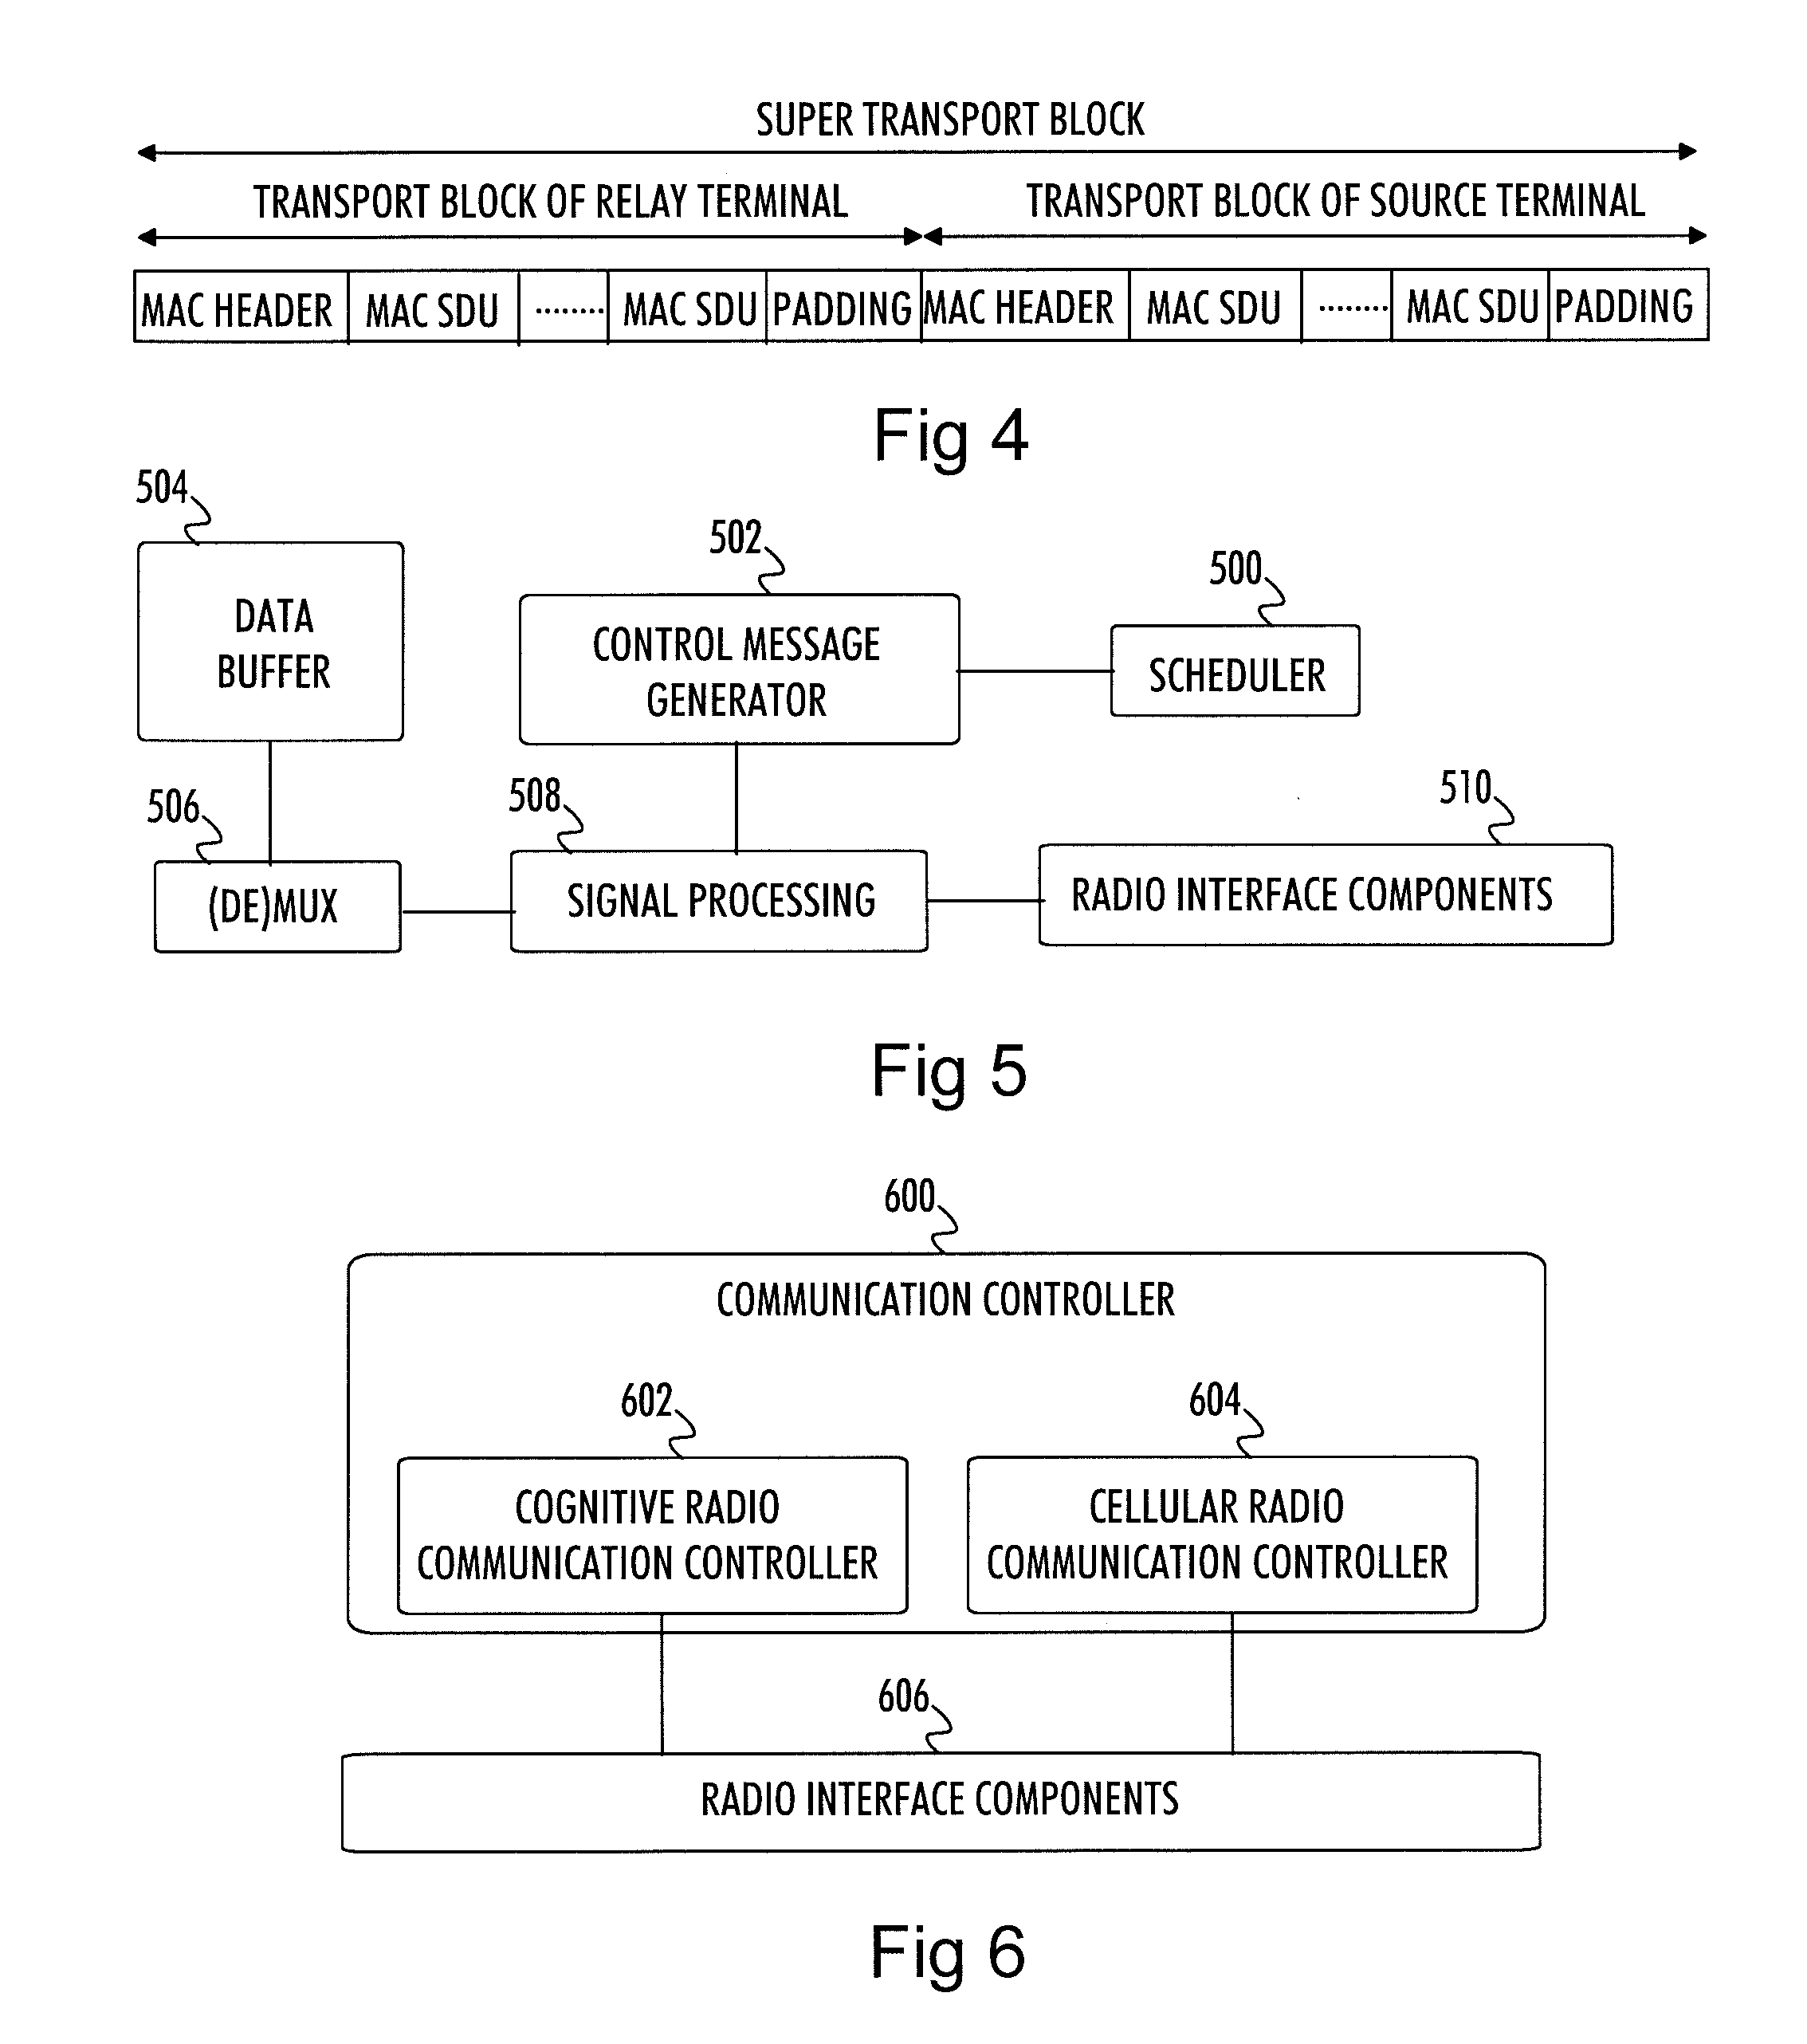 Control Signaling in System Supporting Relayed Connections